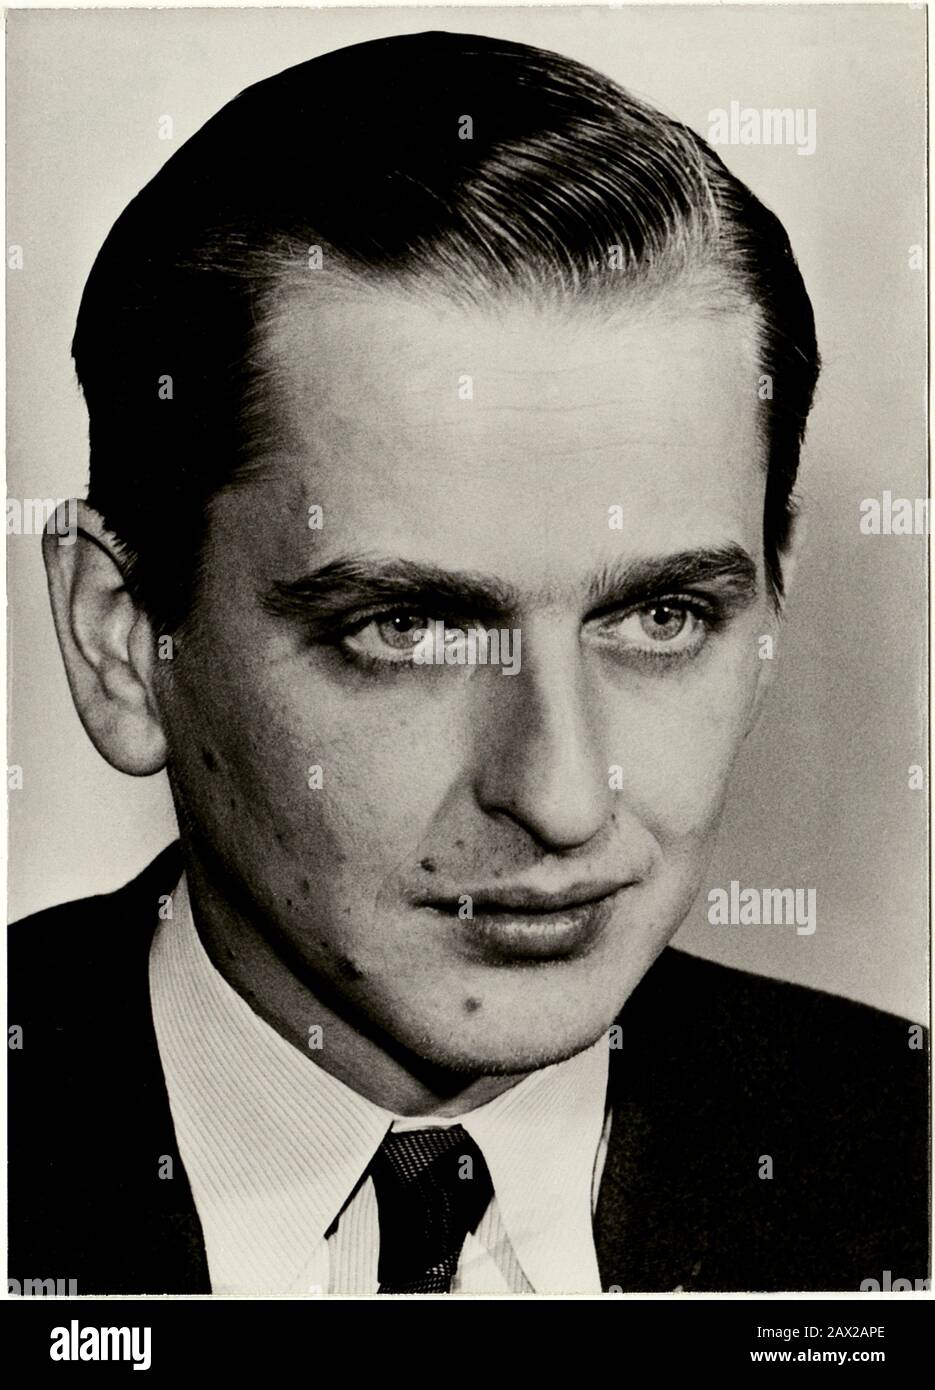 1966 , SWEDEN : The swedish politician OLOF PALME ( 1927 - 1986 ) of Swedish Social Democratic Party , Prime Minister  at time of his assassination . His murder on the hands of an uppapprehended assailant on a street in Stockholm on February 28, 1986 was the first of its kind in modern Swedish history, the first of a national leader since Gustav III, and had a great impact across Scandinavia. In a special of italian national television RAI TG1 in July 1990  hypothesized an involvement of the CIA and the P2  . - POLITICO - POLITICA - POLITIC  - foto storiche - foto storica - portrait - ritratto Stock Photo